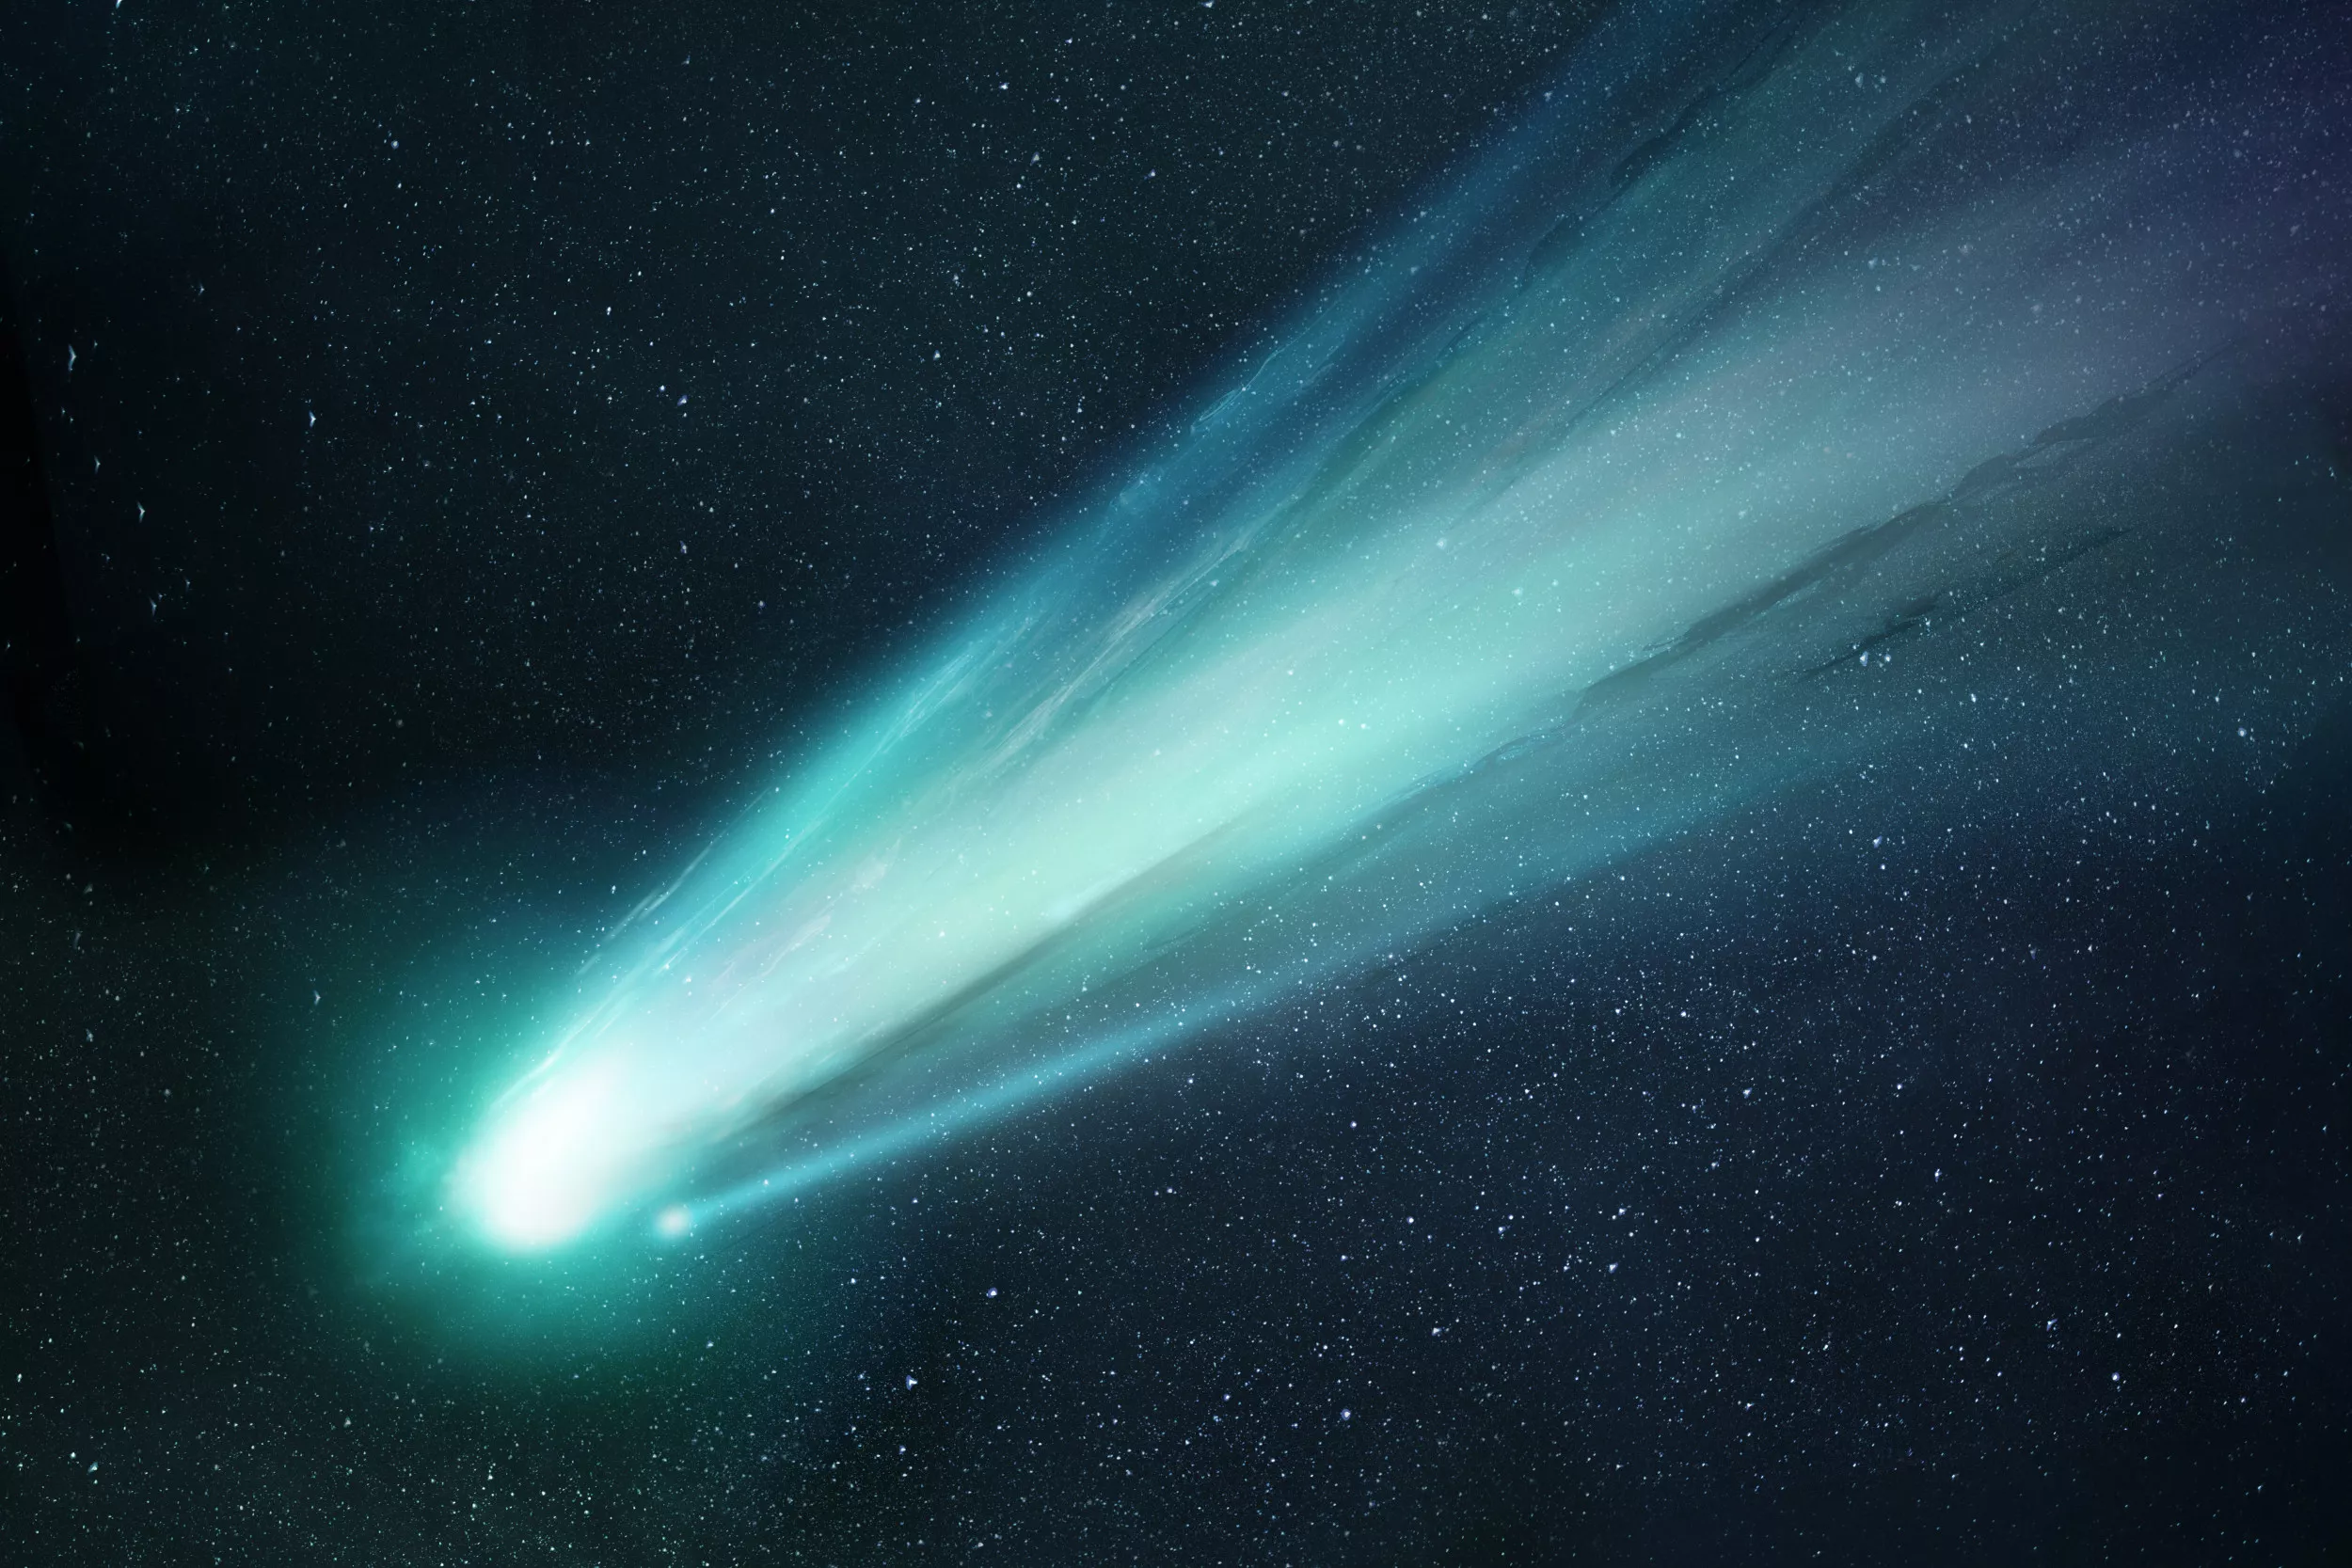 Comet Now Visible in the Night Sky May Never Return to Earth - Newsweek